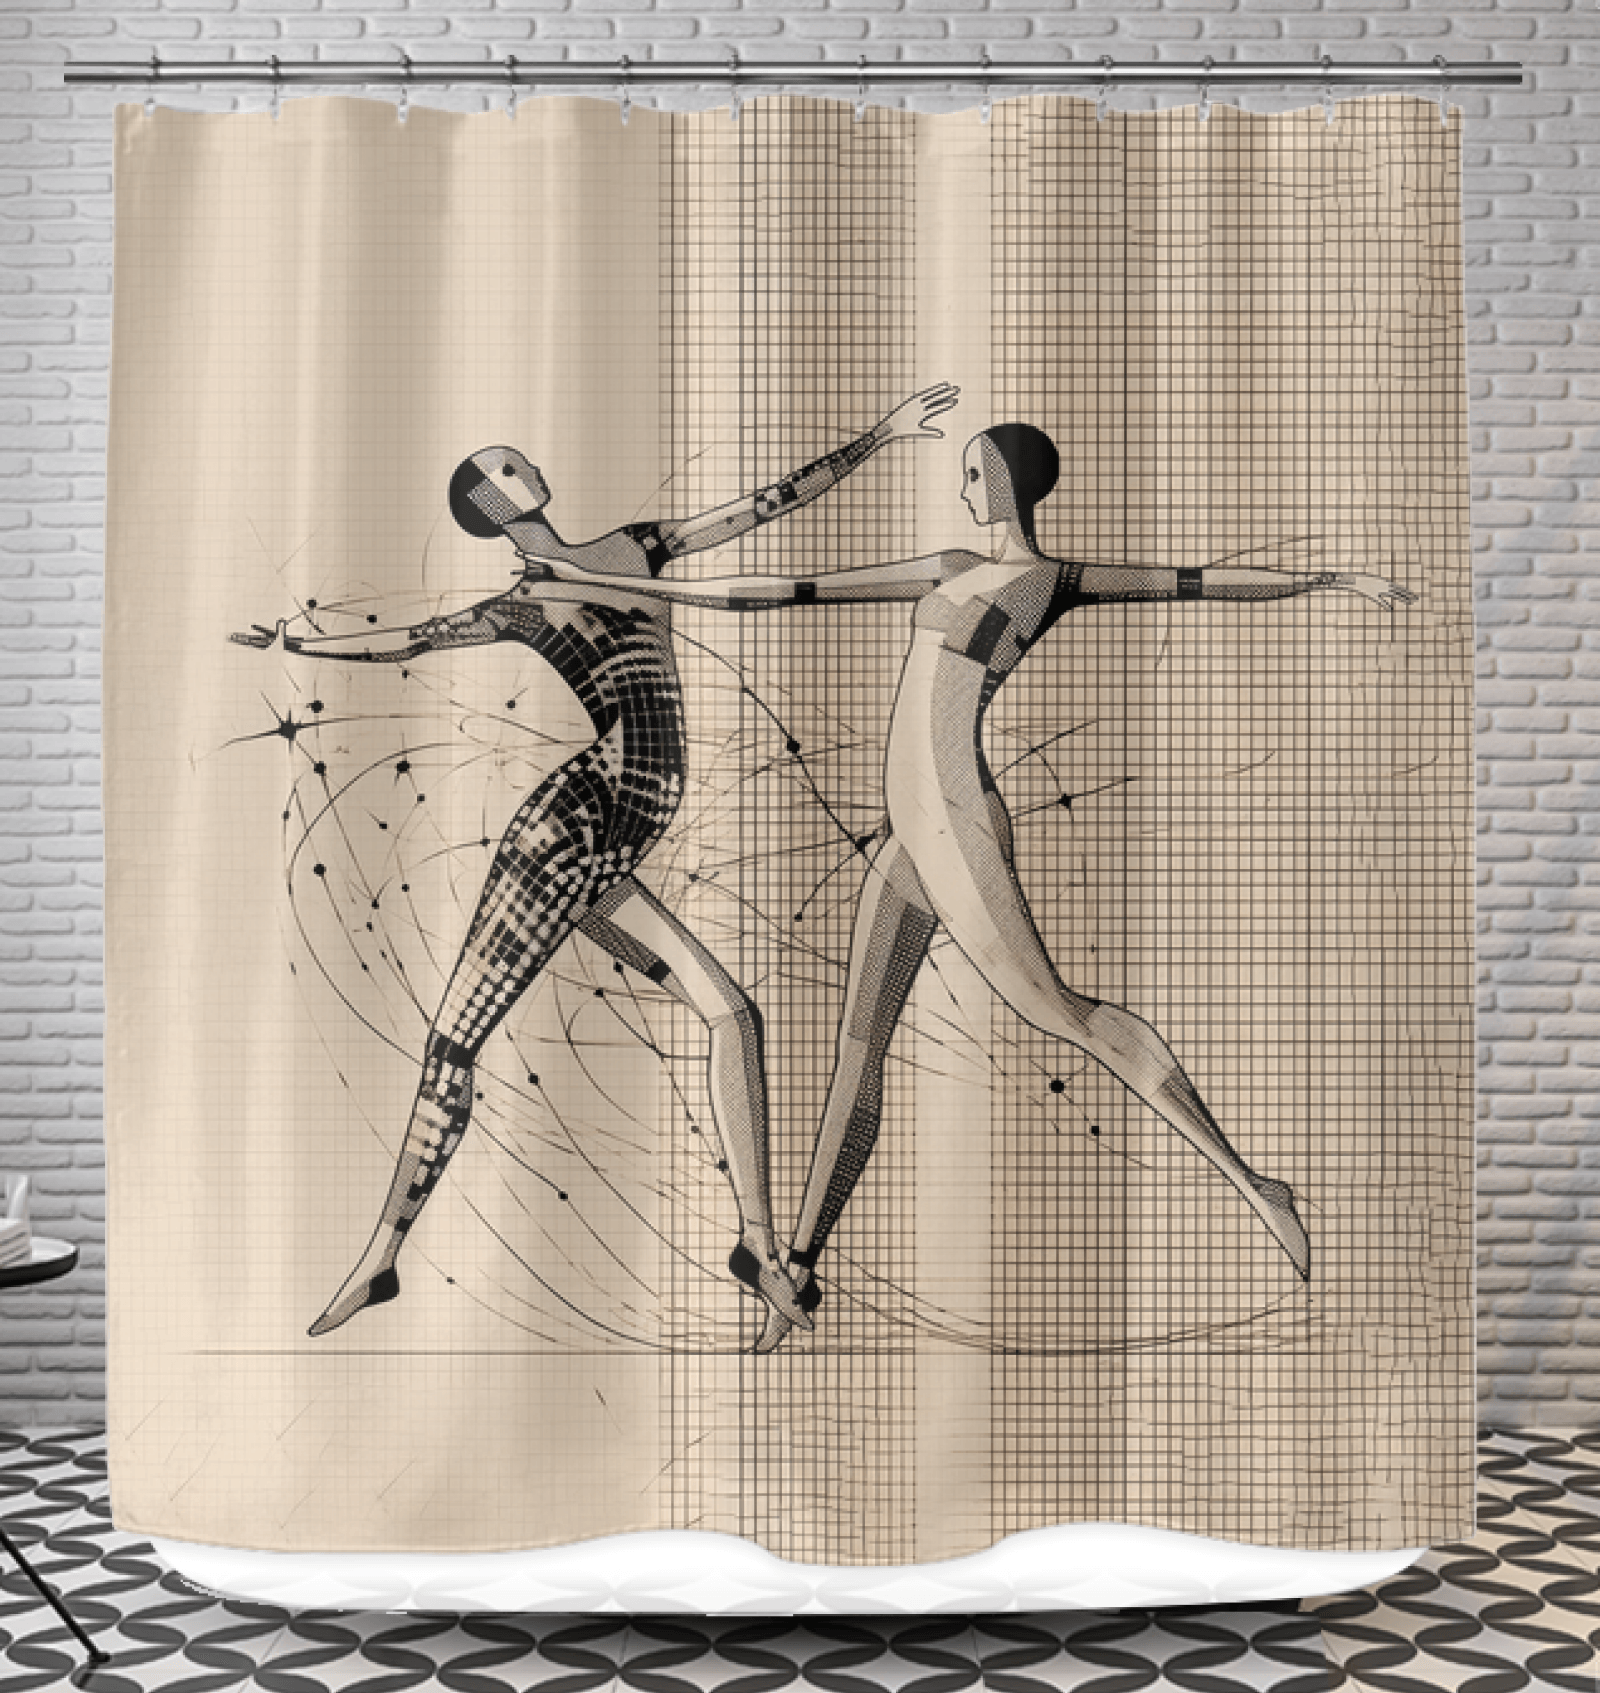 Elegant shower curtain featuring a sultry women's dance style design to enhance bathroom decor.